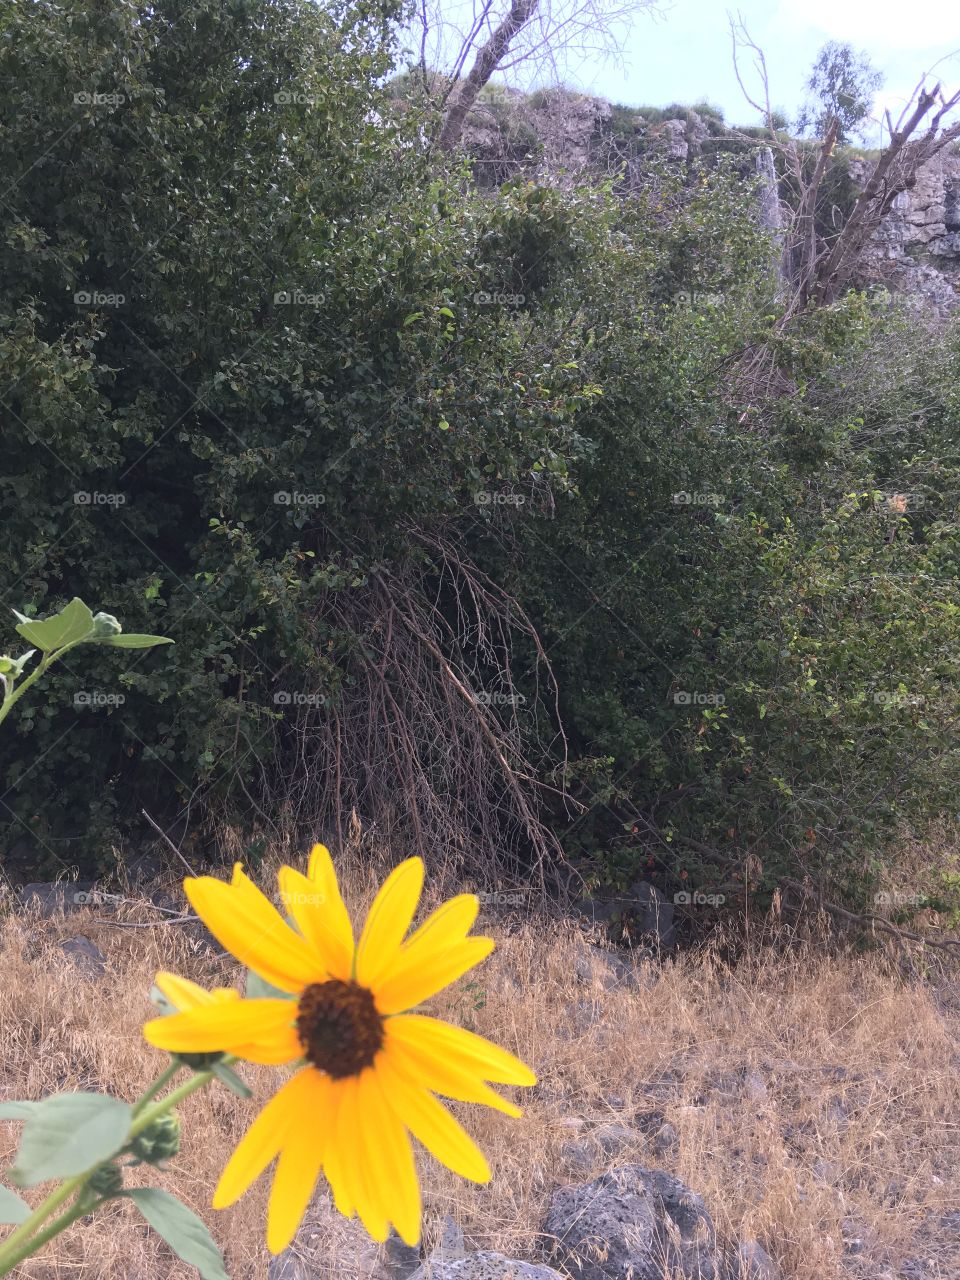 Sunflower on the trail.